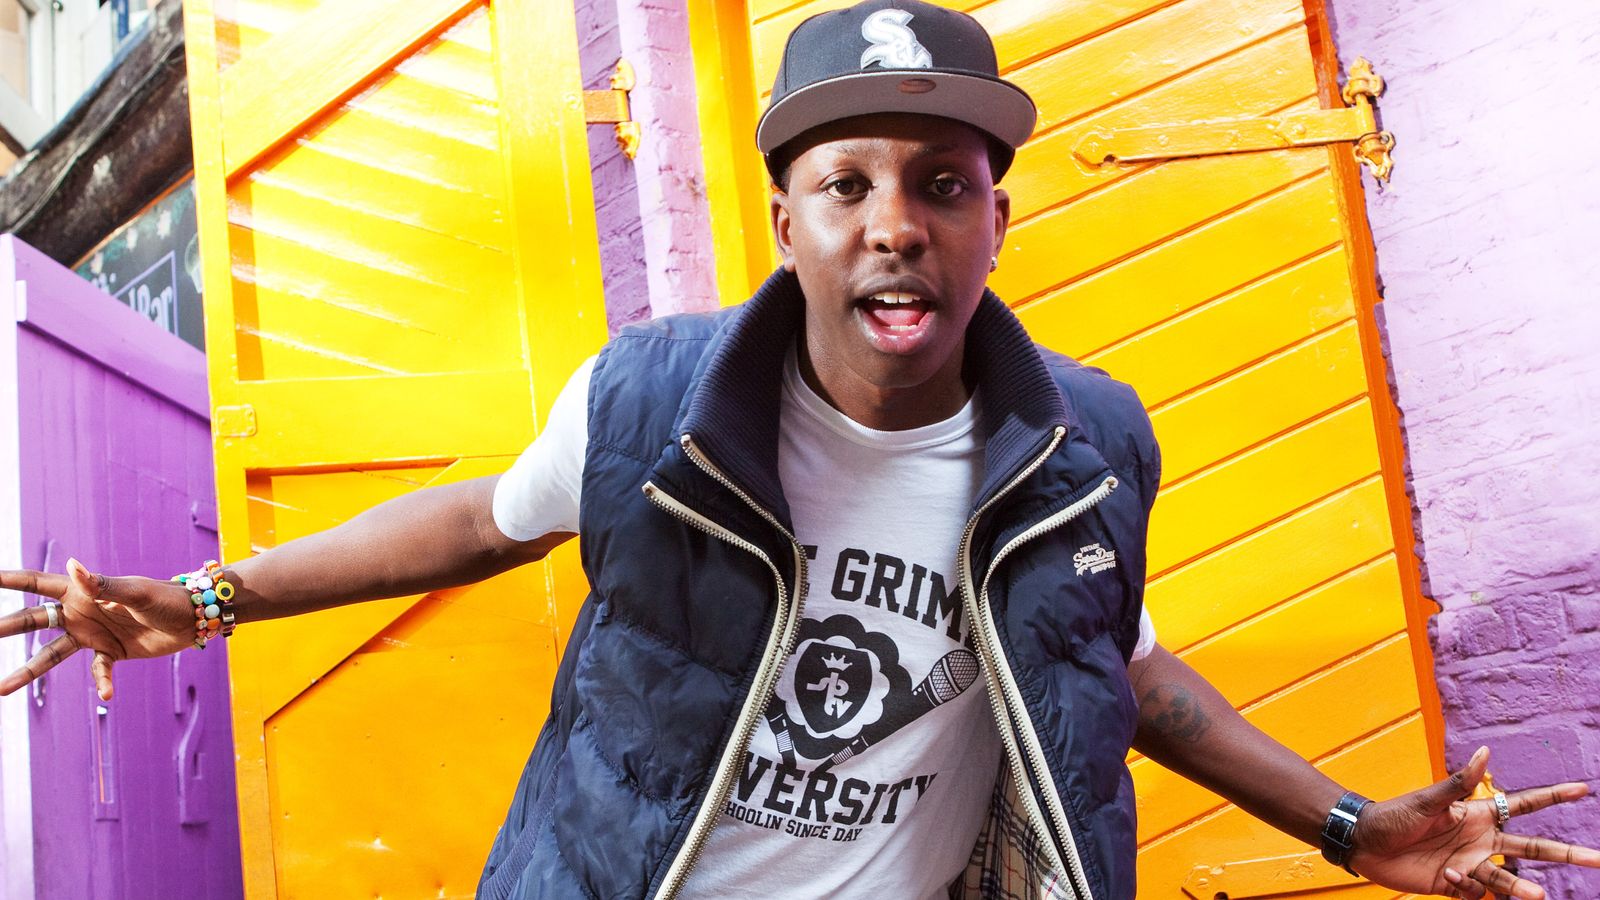 It all started in his bedroom: how Jamal Edwards changed the UK music scene